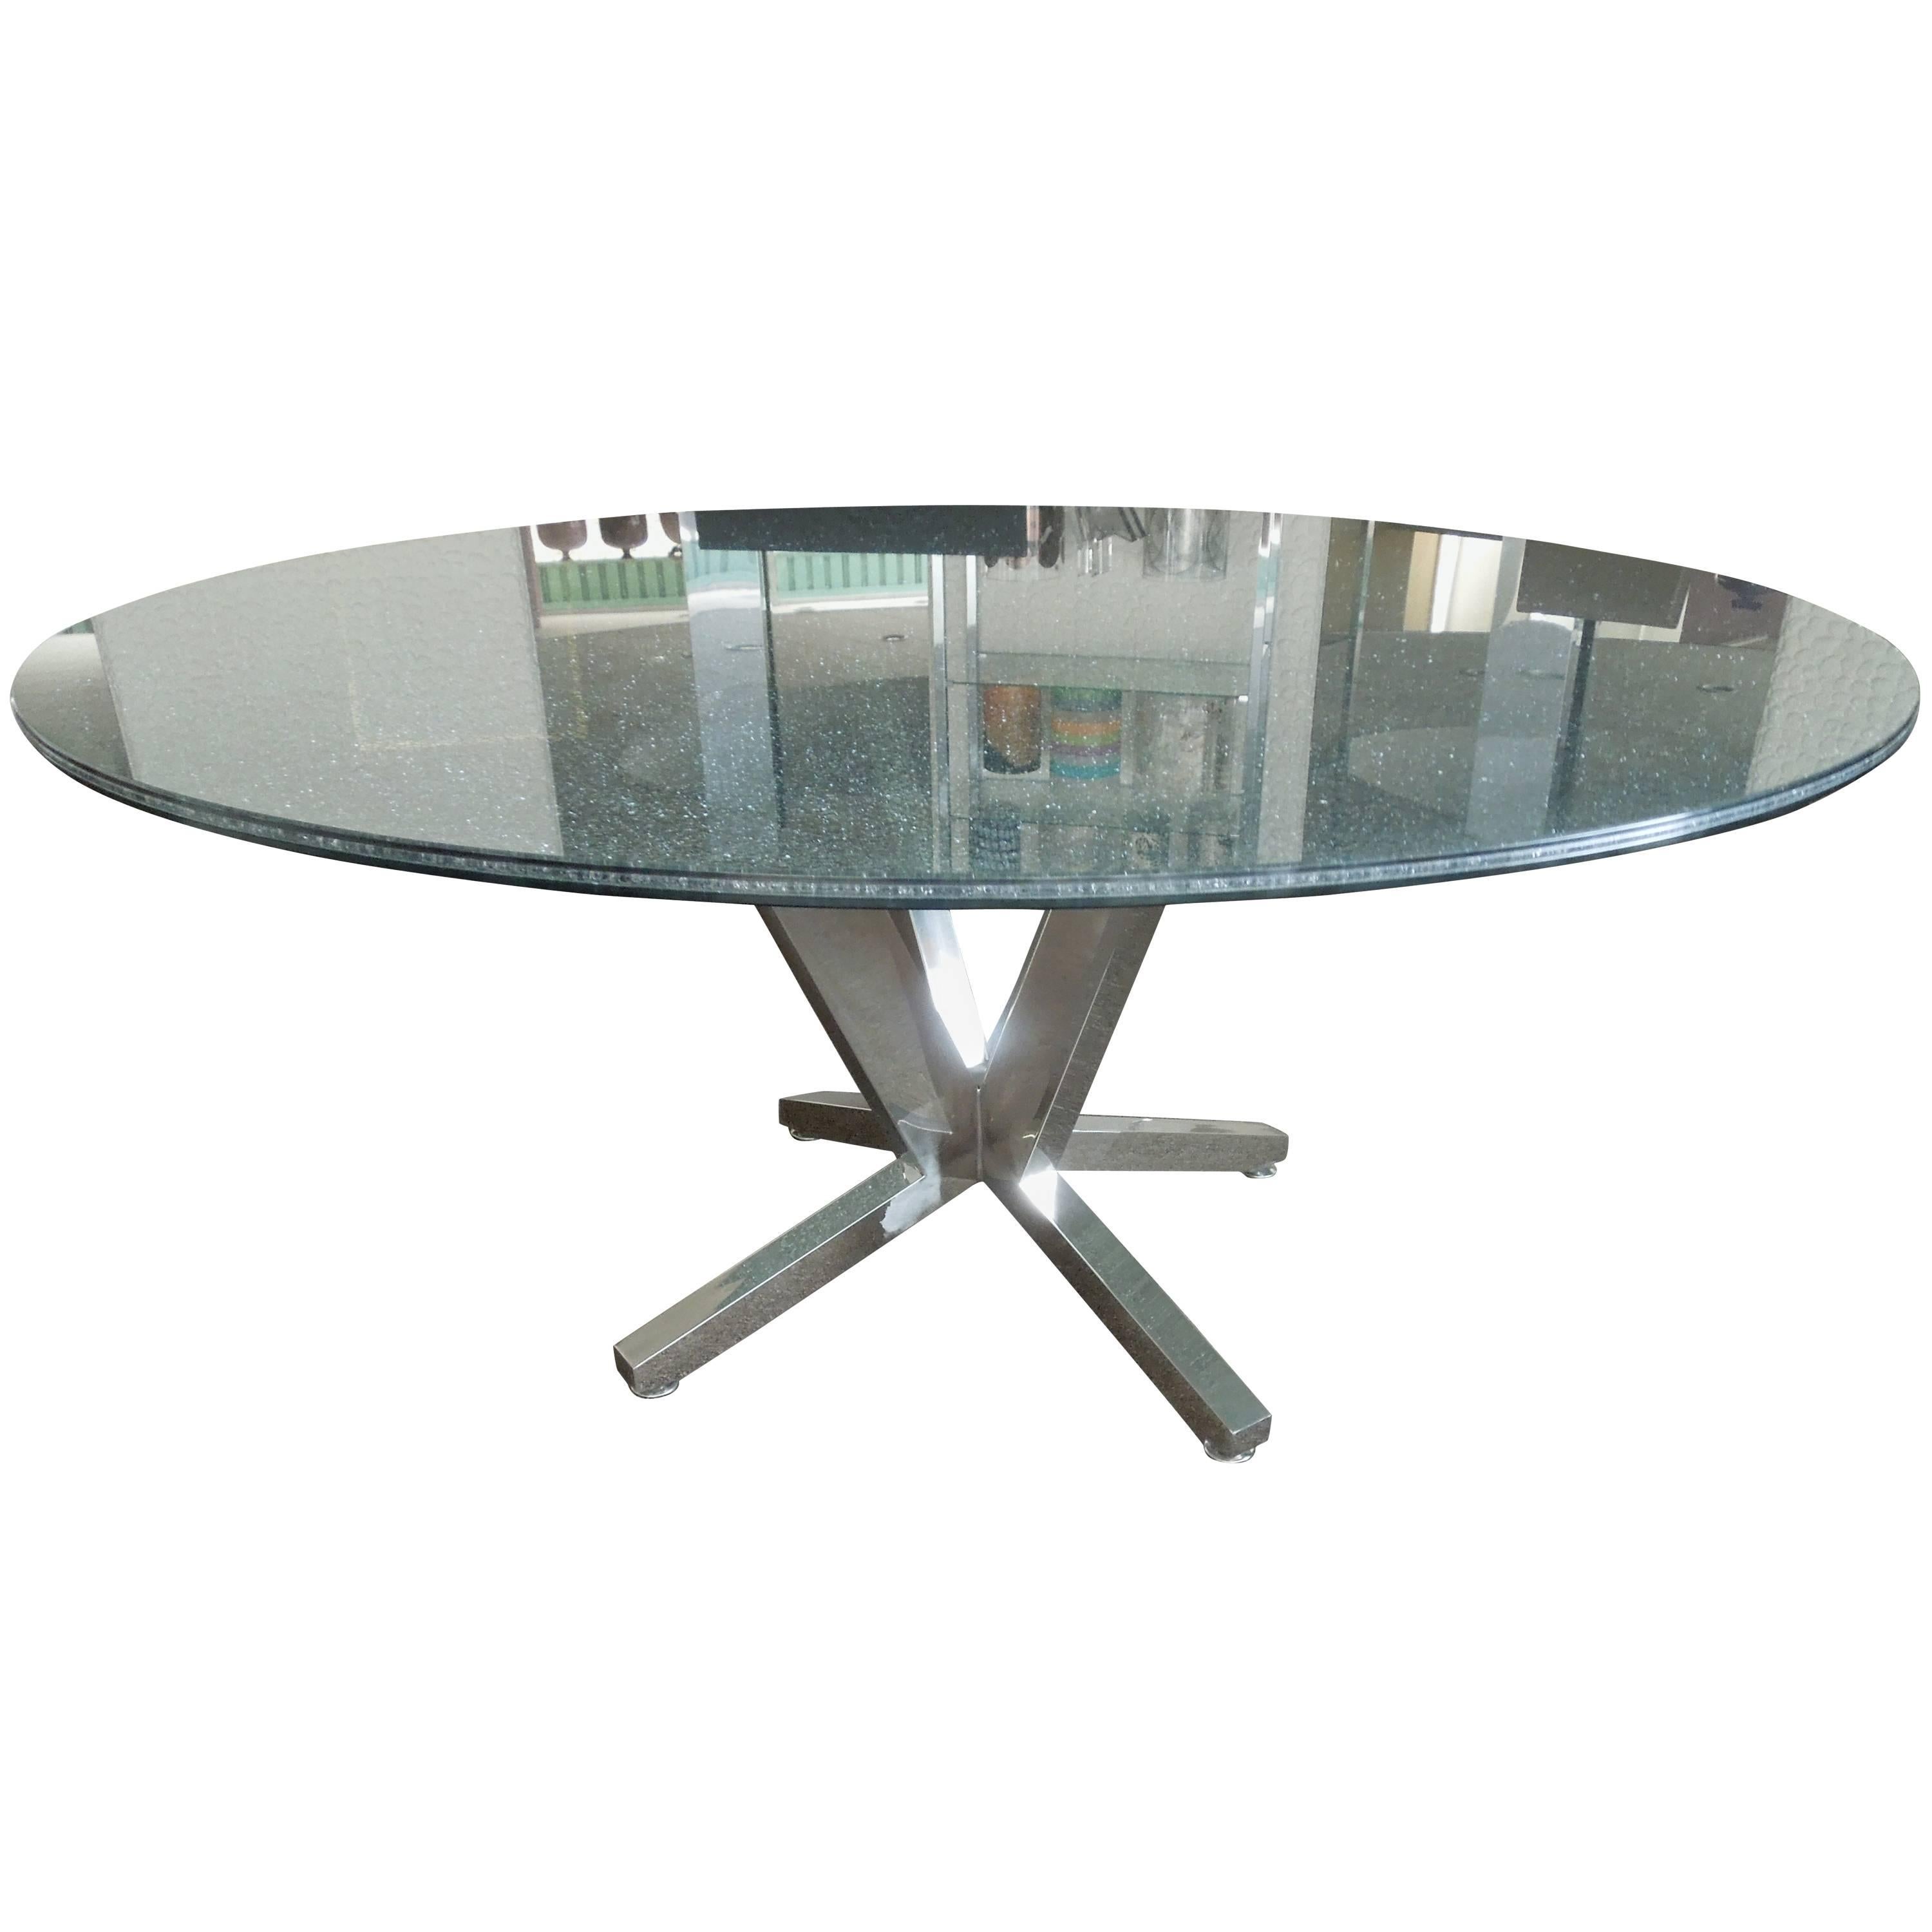 Contemporary Crackle Glass and Chrome Sculptural Dining Table